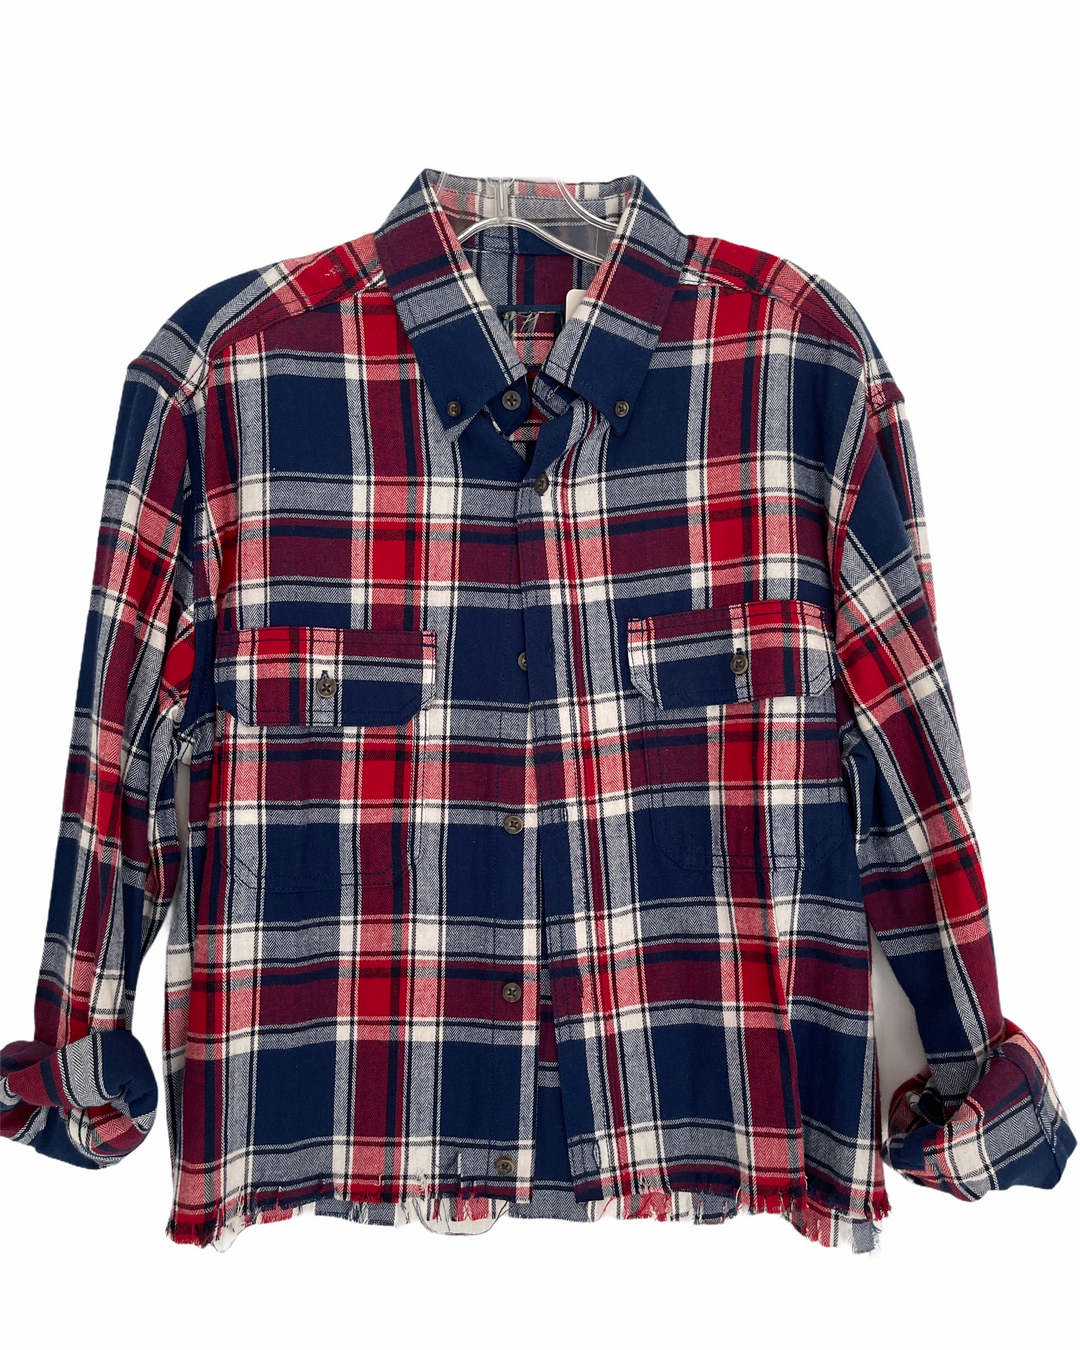 UPenn Patched Flannel